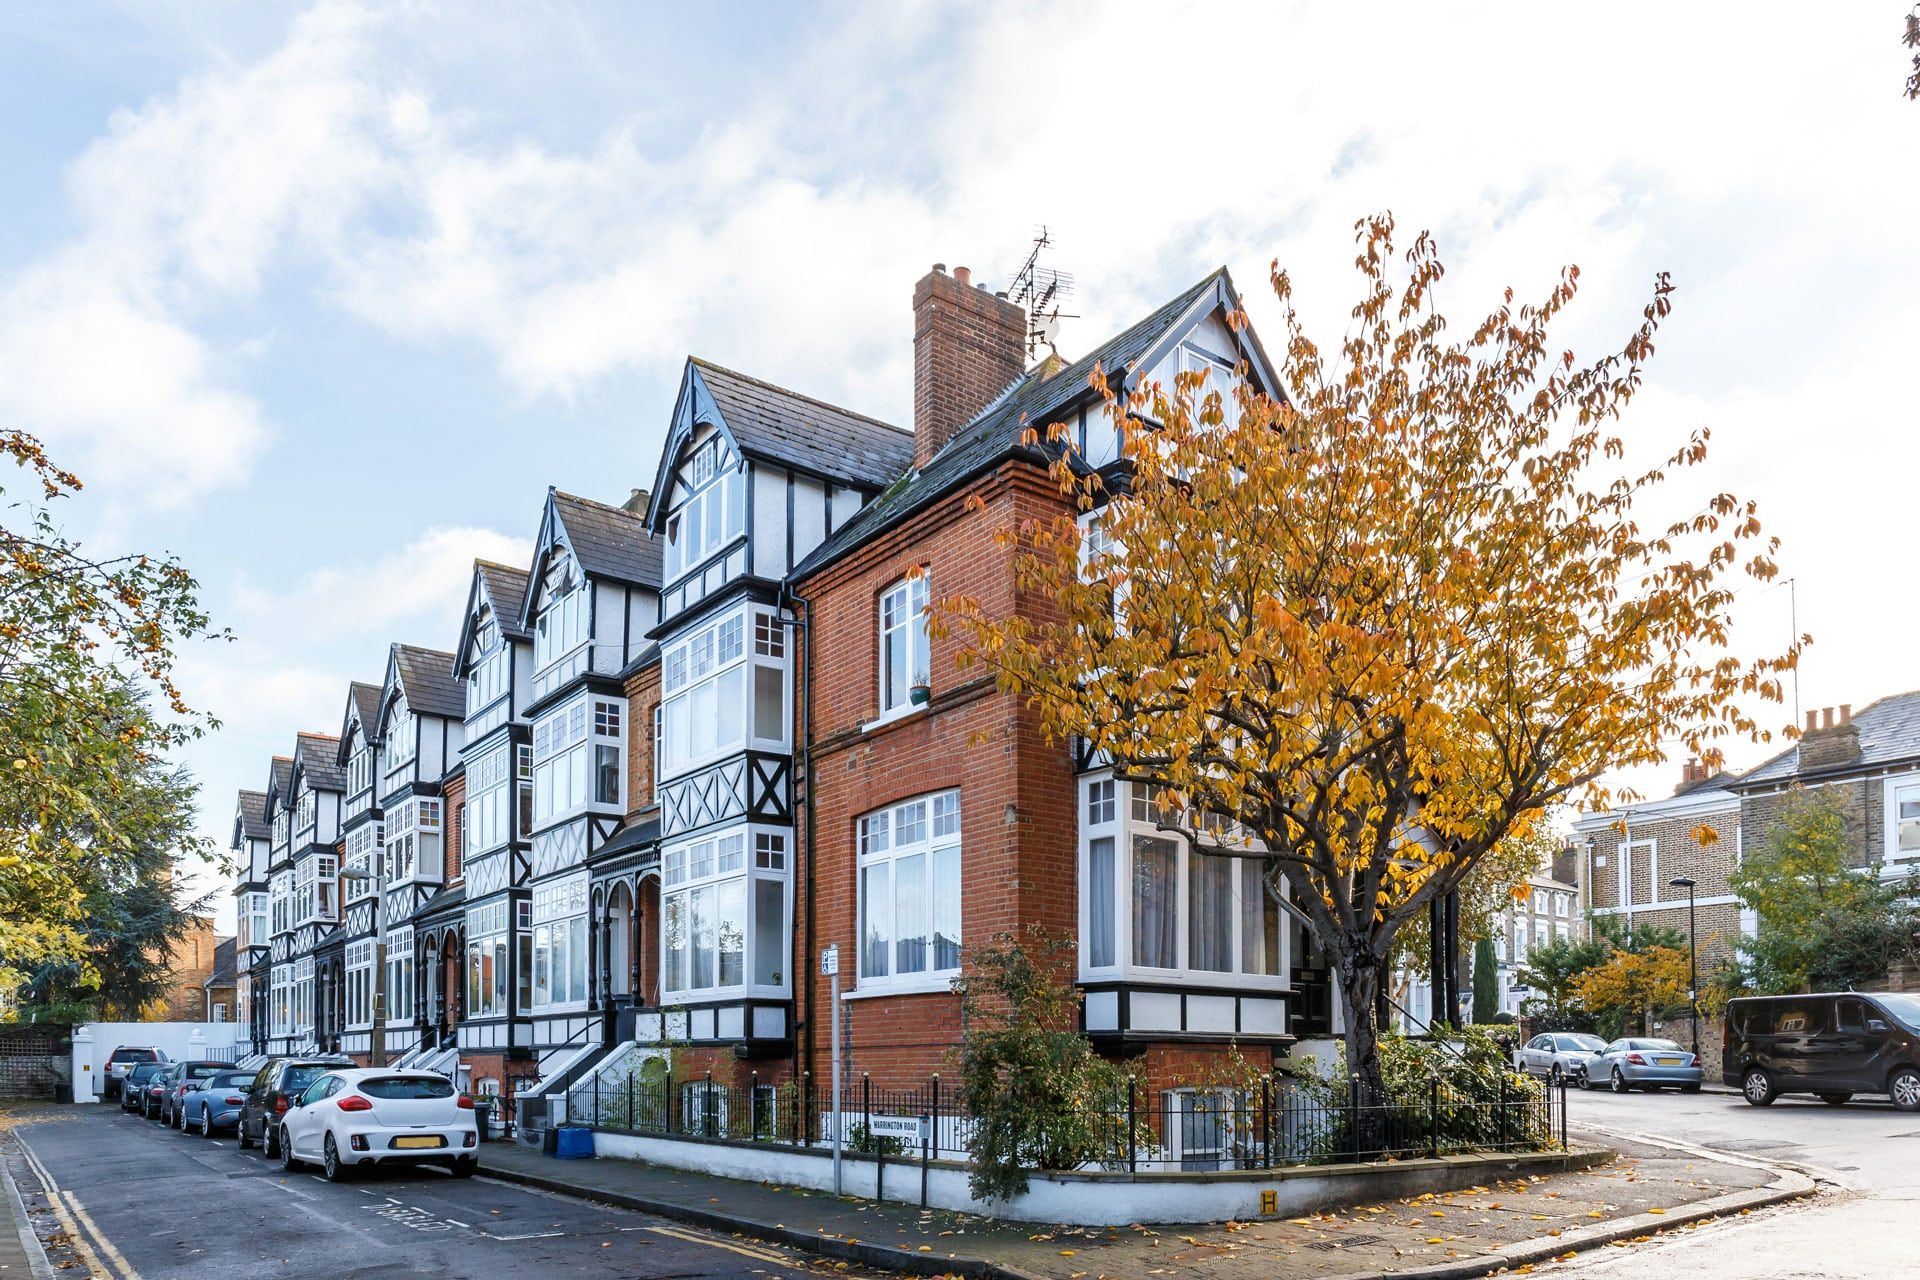 Selling Your North London Property